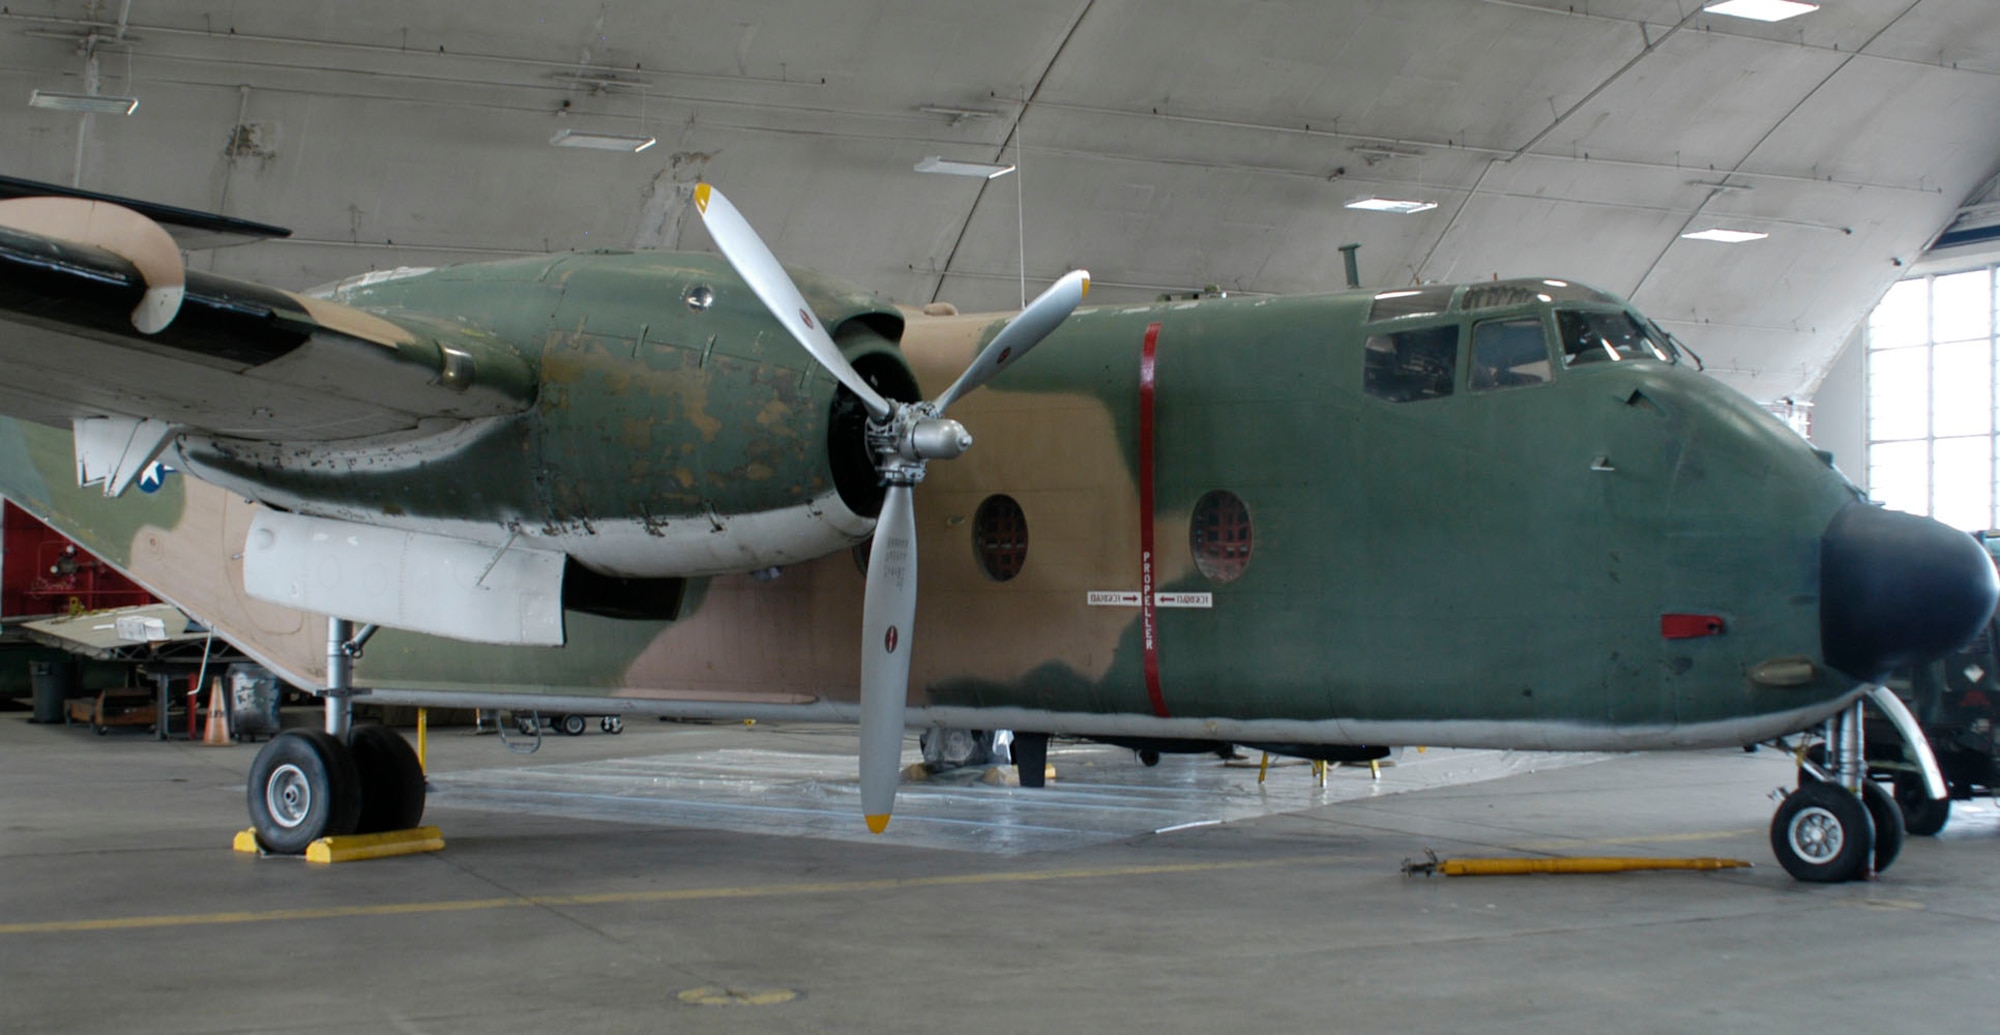 DAYTON, Ohio -- De Havilland C-7A in the Restoration Hangar at the National Museum of the U.S. Air Force. (U.S. Air Force Photo)